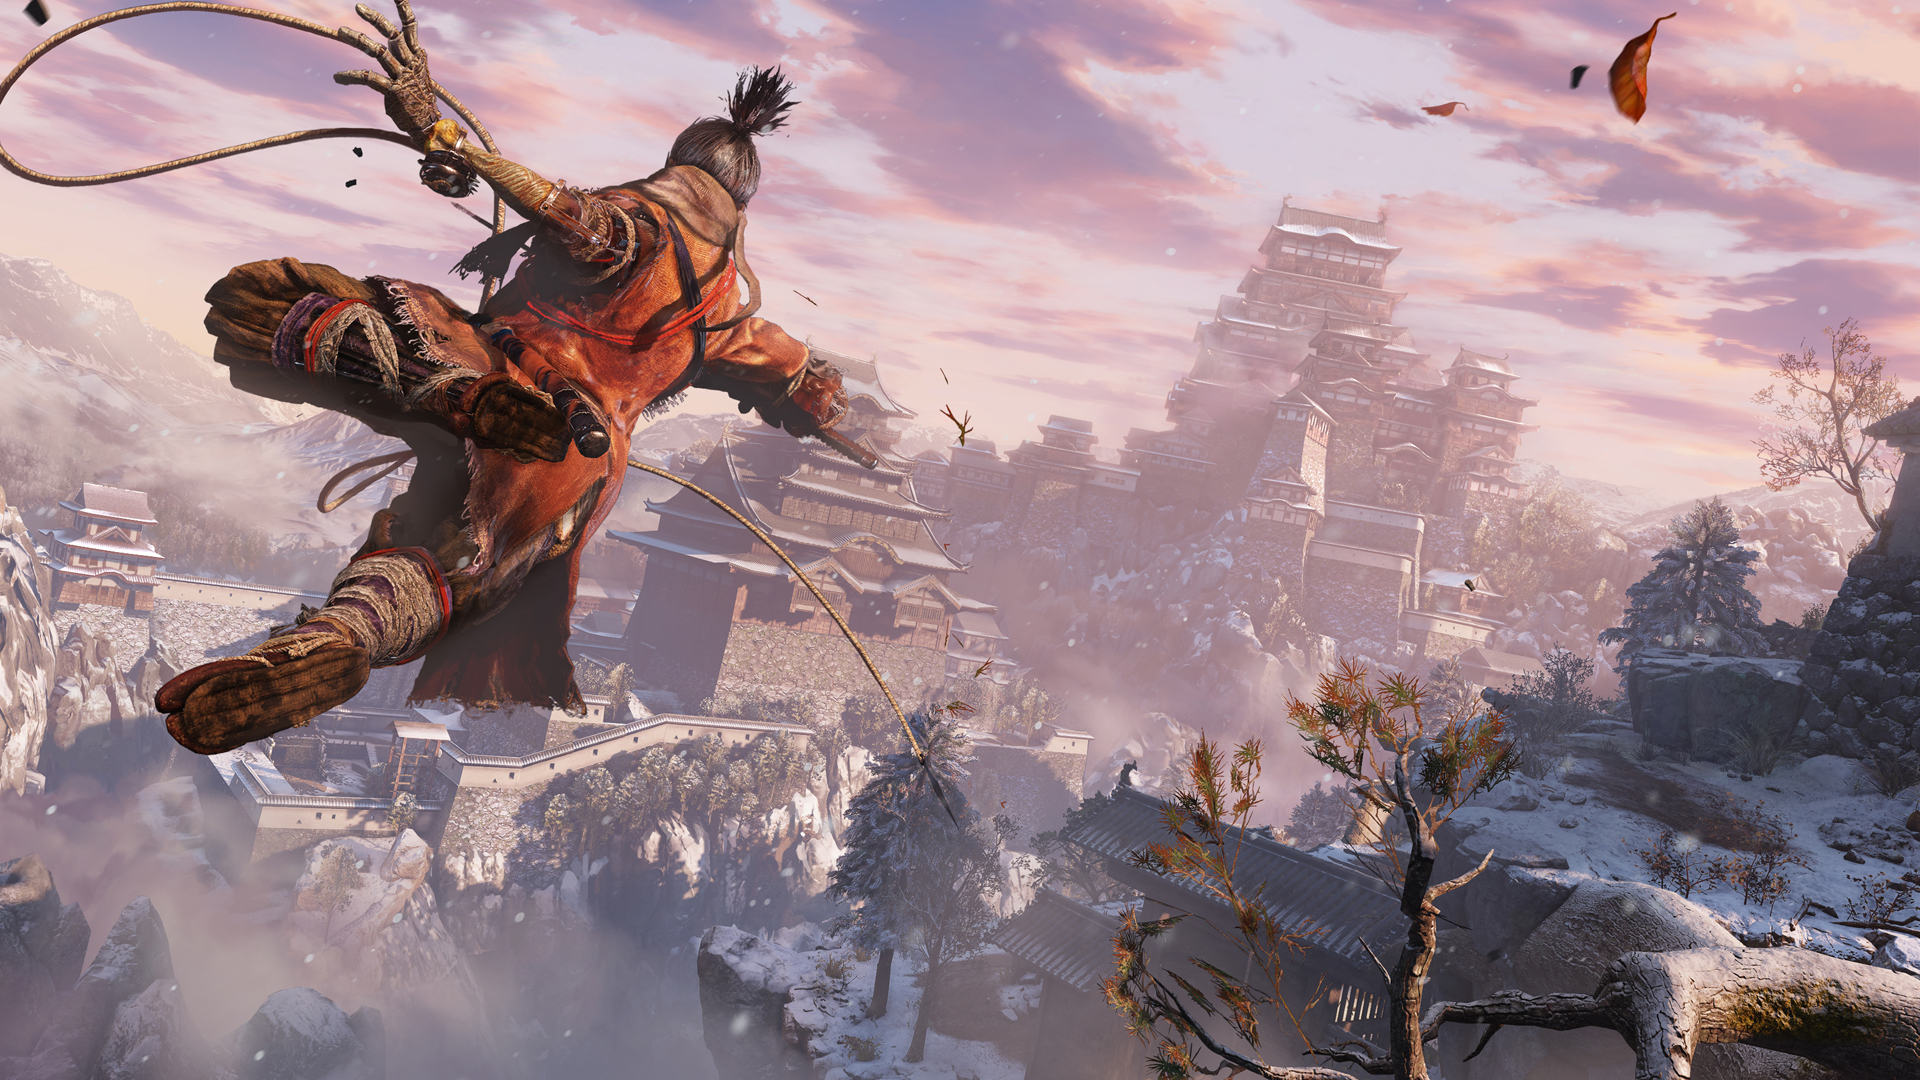 General 1920x1080 Sekiro: Shadows Die Twice From Software Activision video game art screen shot video games sunlight video game characters CGI sky clouds trees snow castle leaves